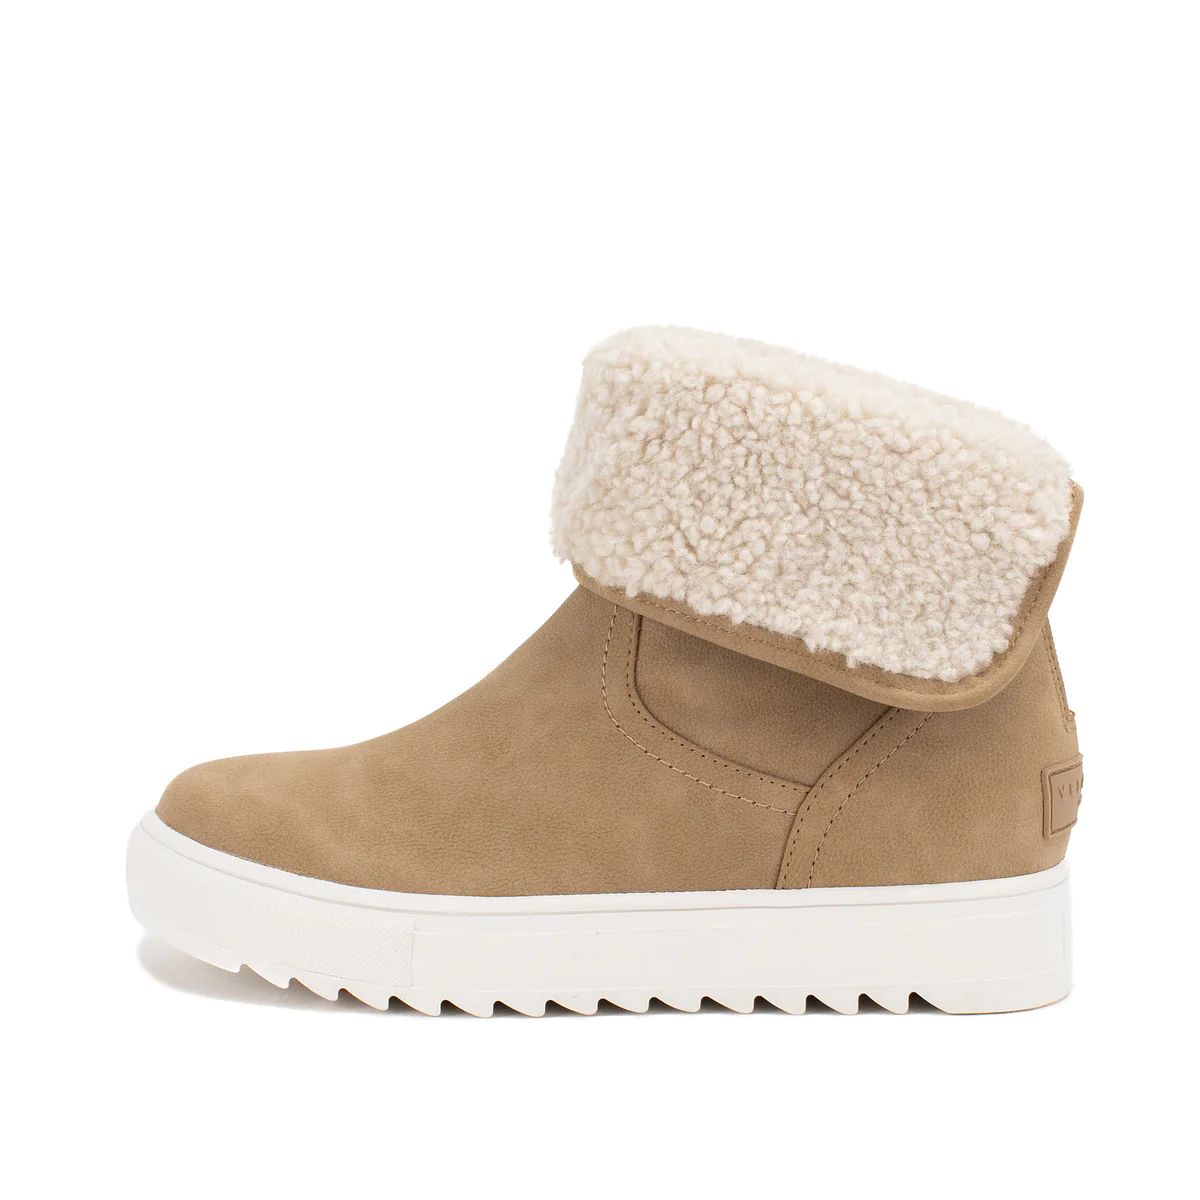 Melisa Wedge Sneaker Boot | Yellow Box Official Site | Yellow Box